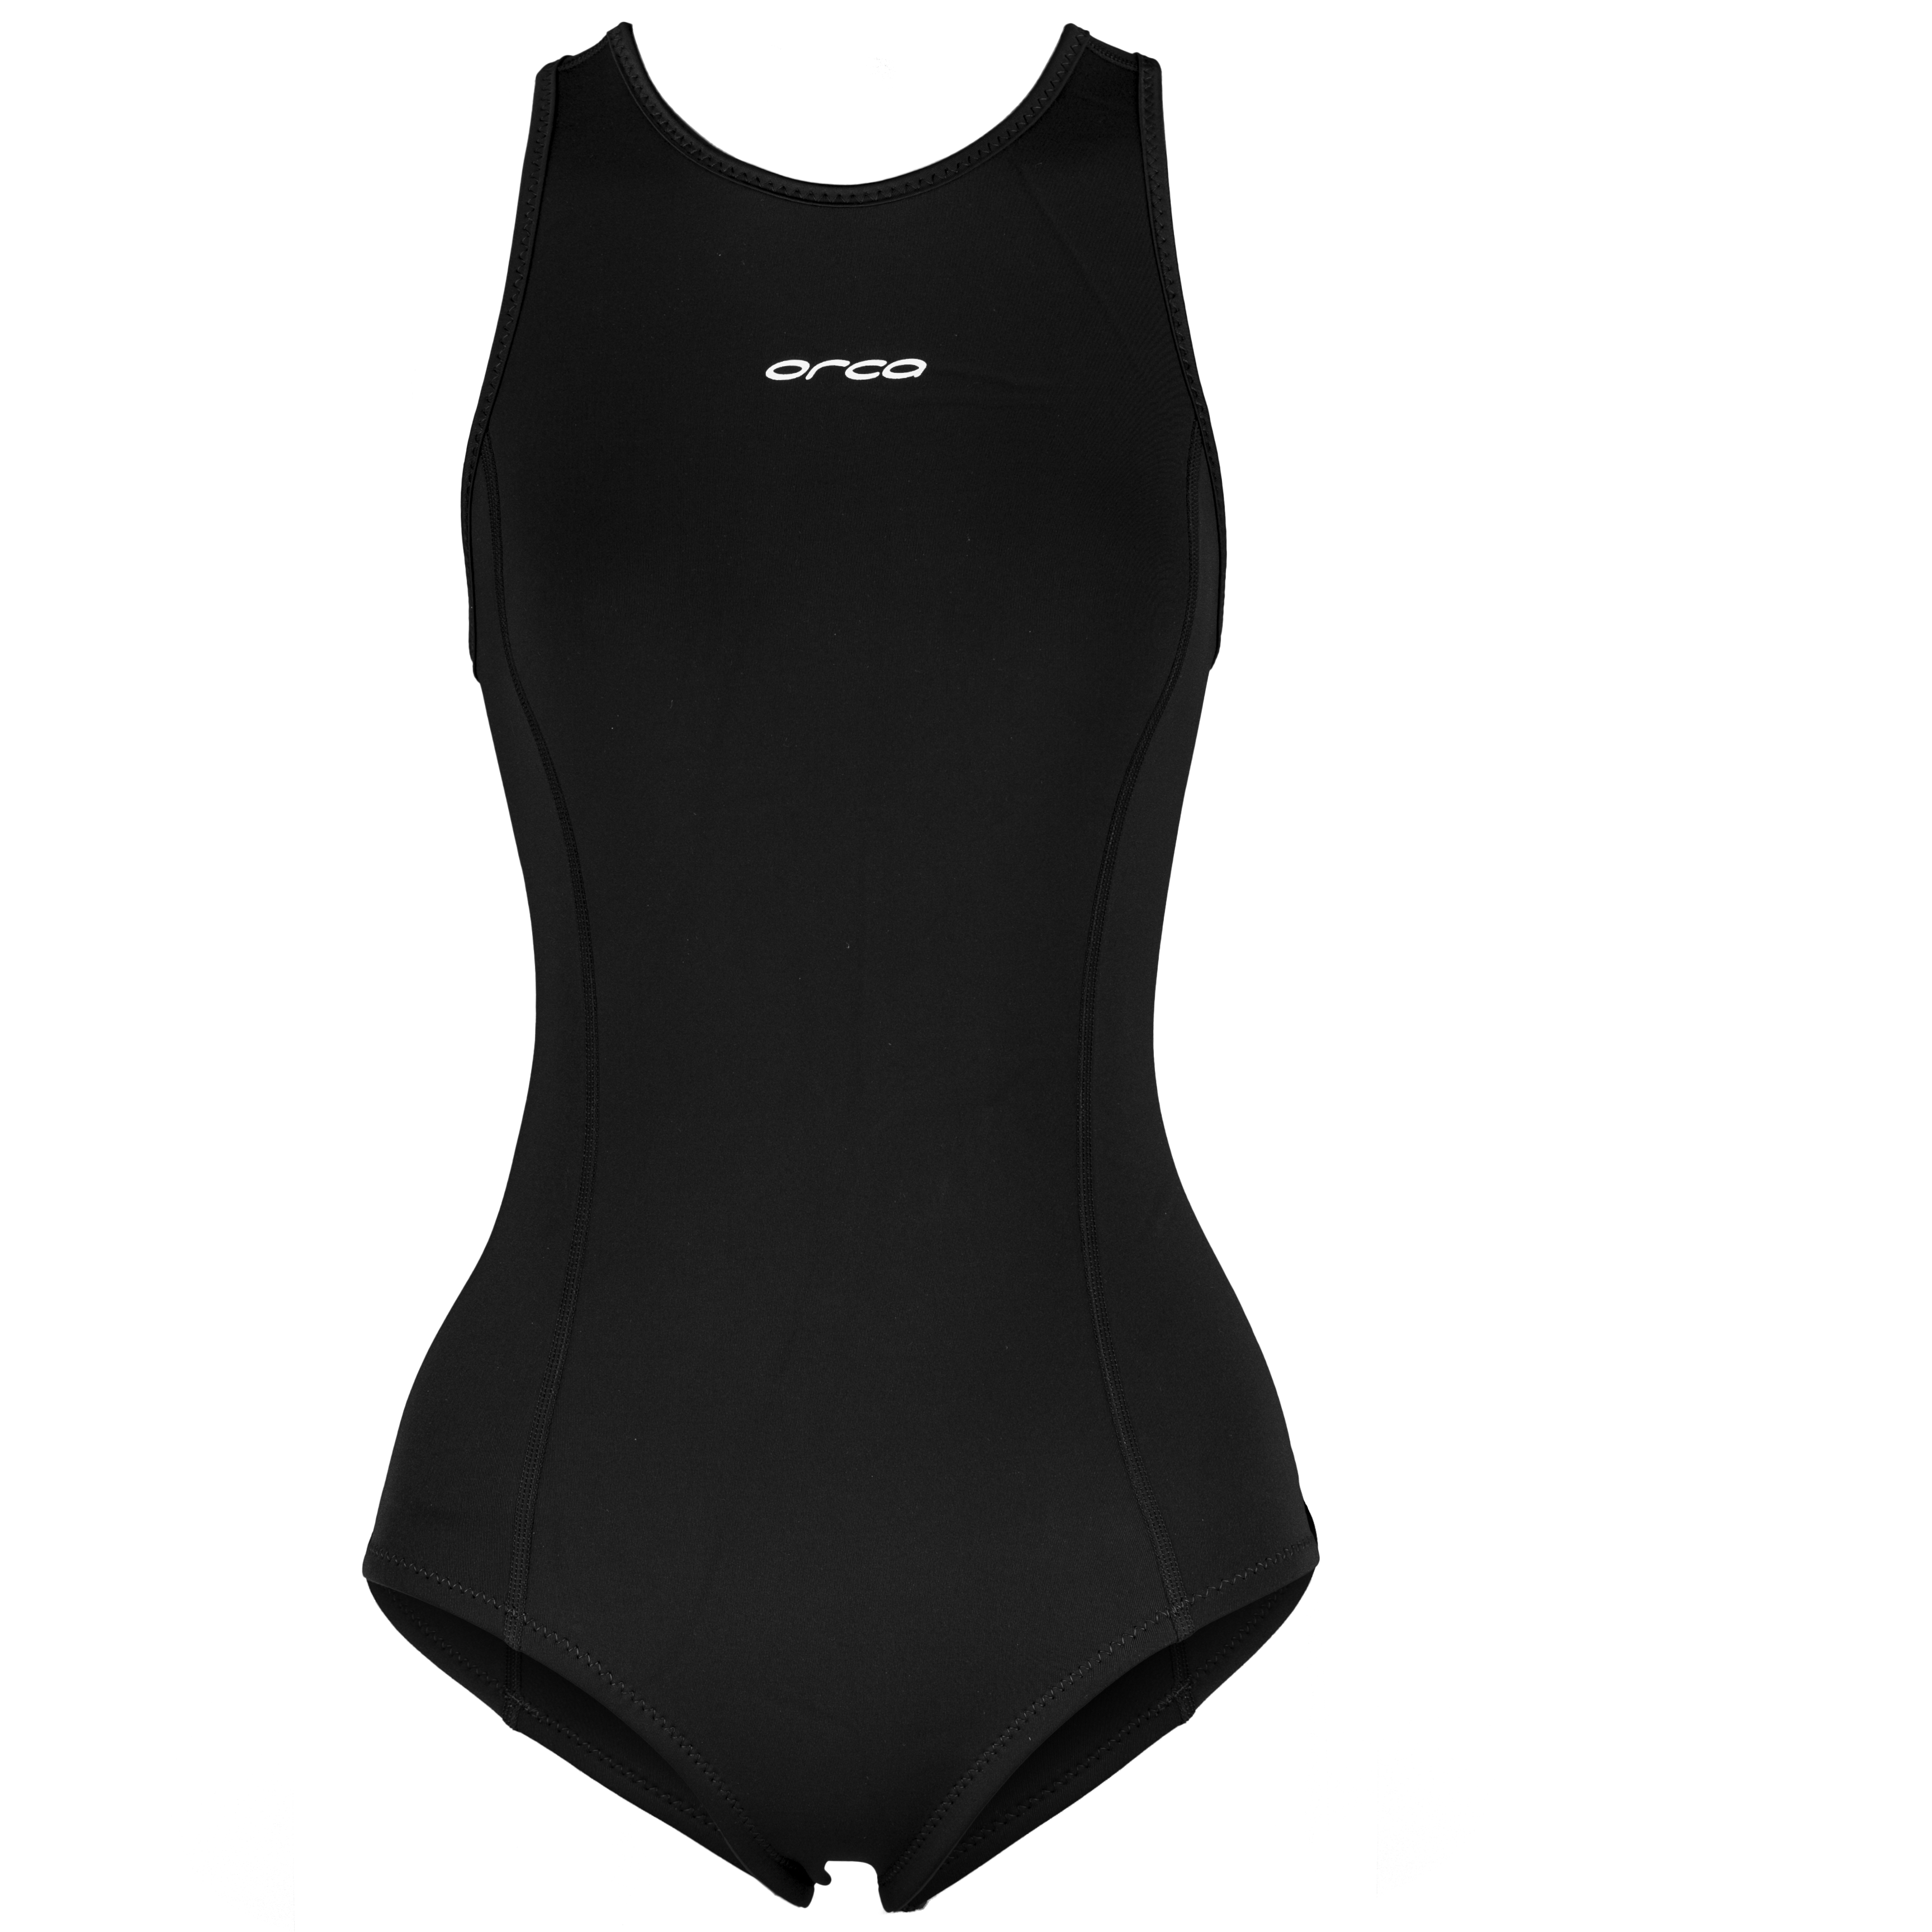 orca Trisuits Neoprene Womens One Piece